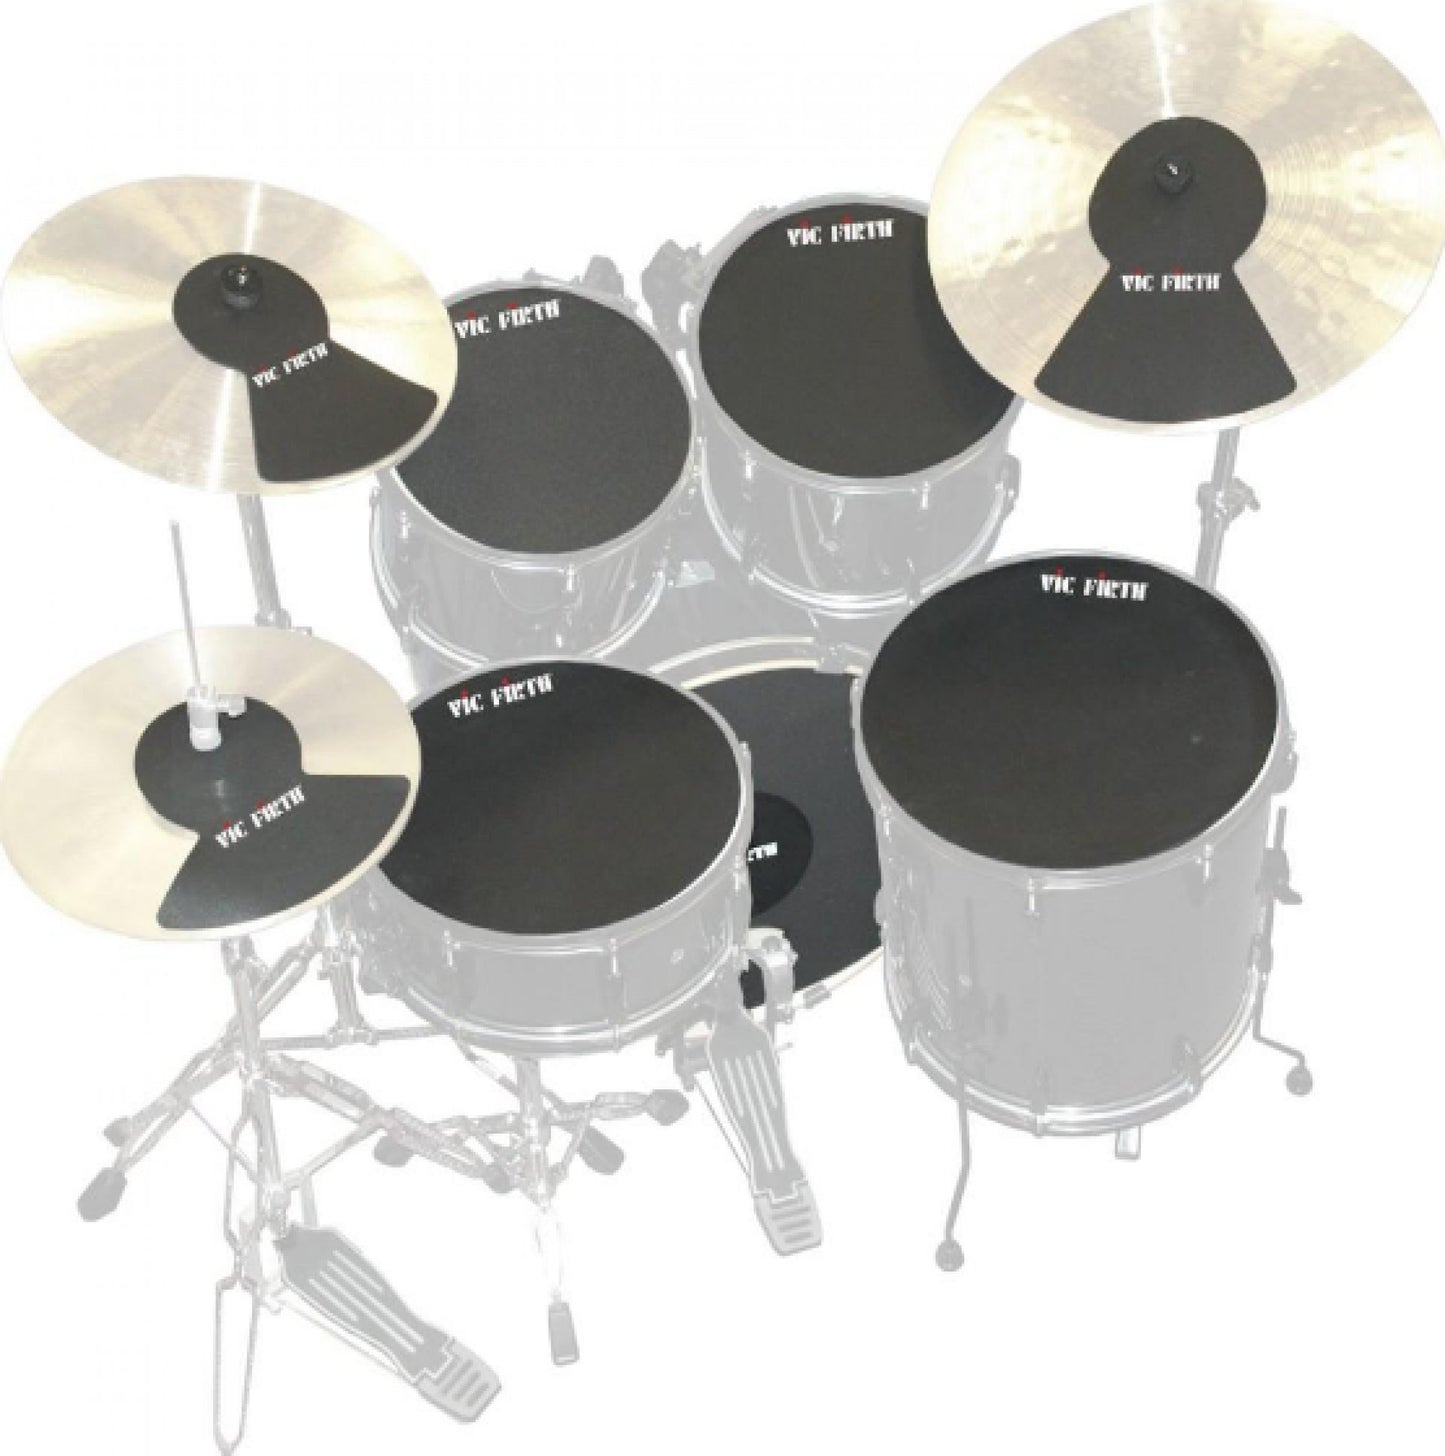 Vic Firth MUTEPP7 Drum and Cymbal Mute Pack - Set of 6